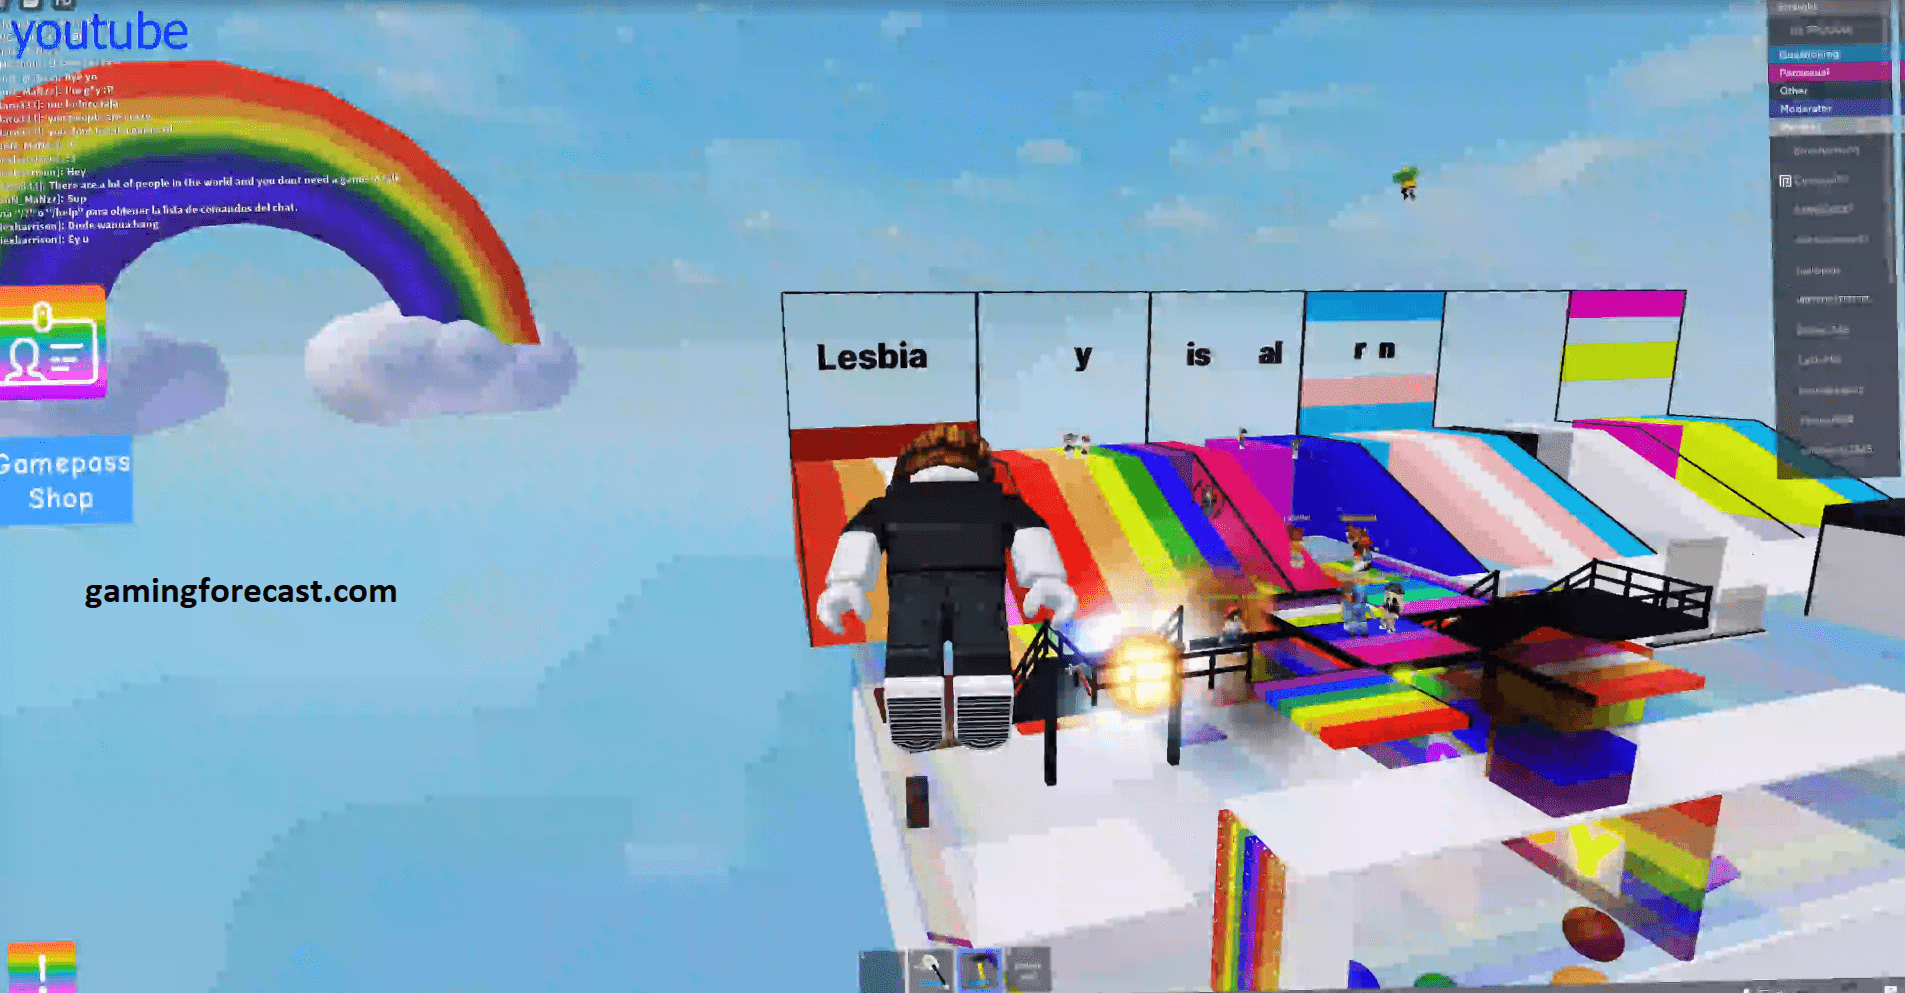 Roblox Hack Download Pc Destroy Lobby Fly Aimbot Scripts 2021 Gaming Forecast Download Free Online Game Hacks - roblox hack free download ios